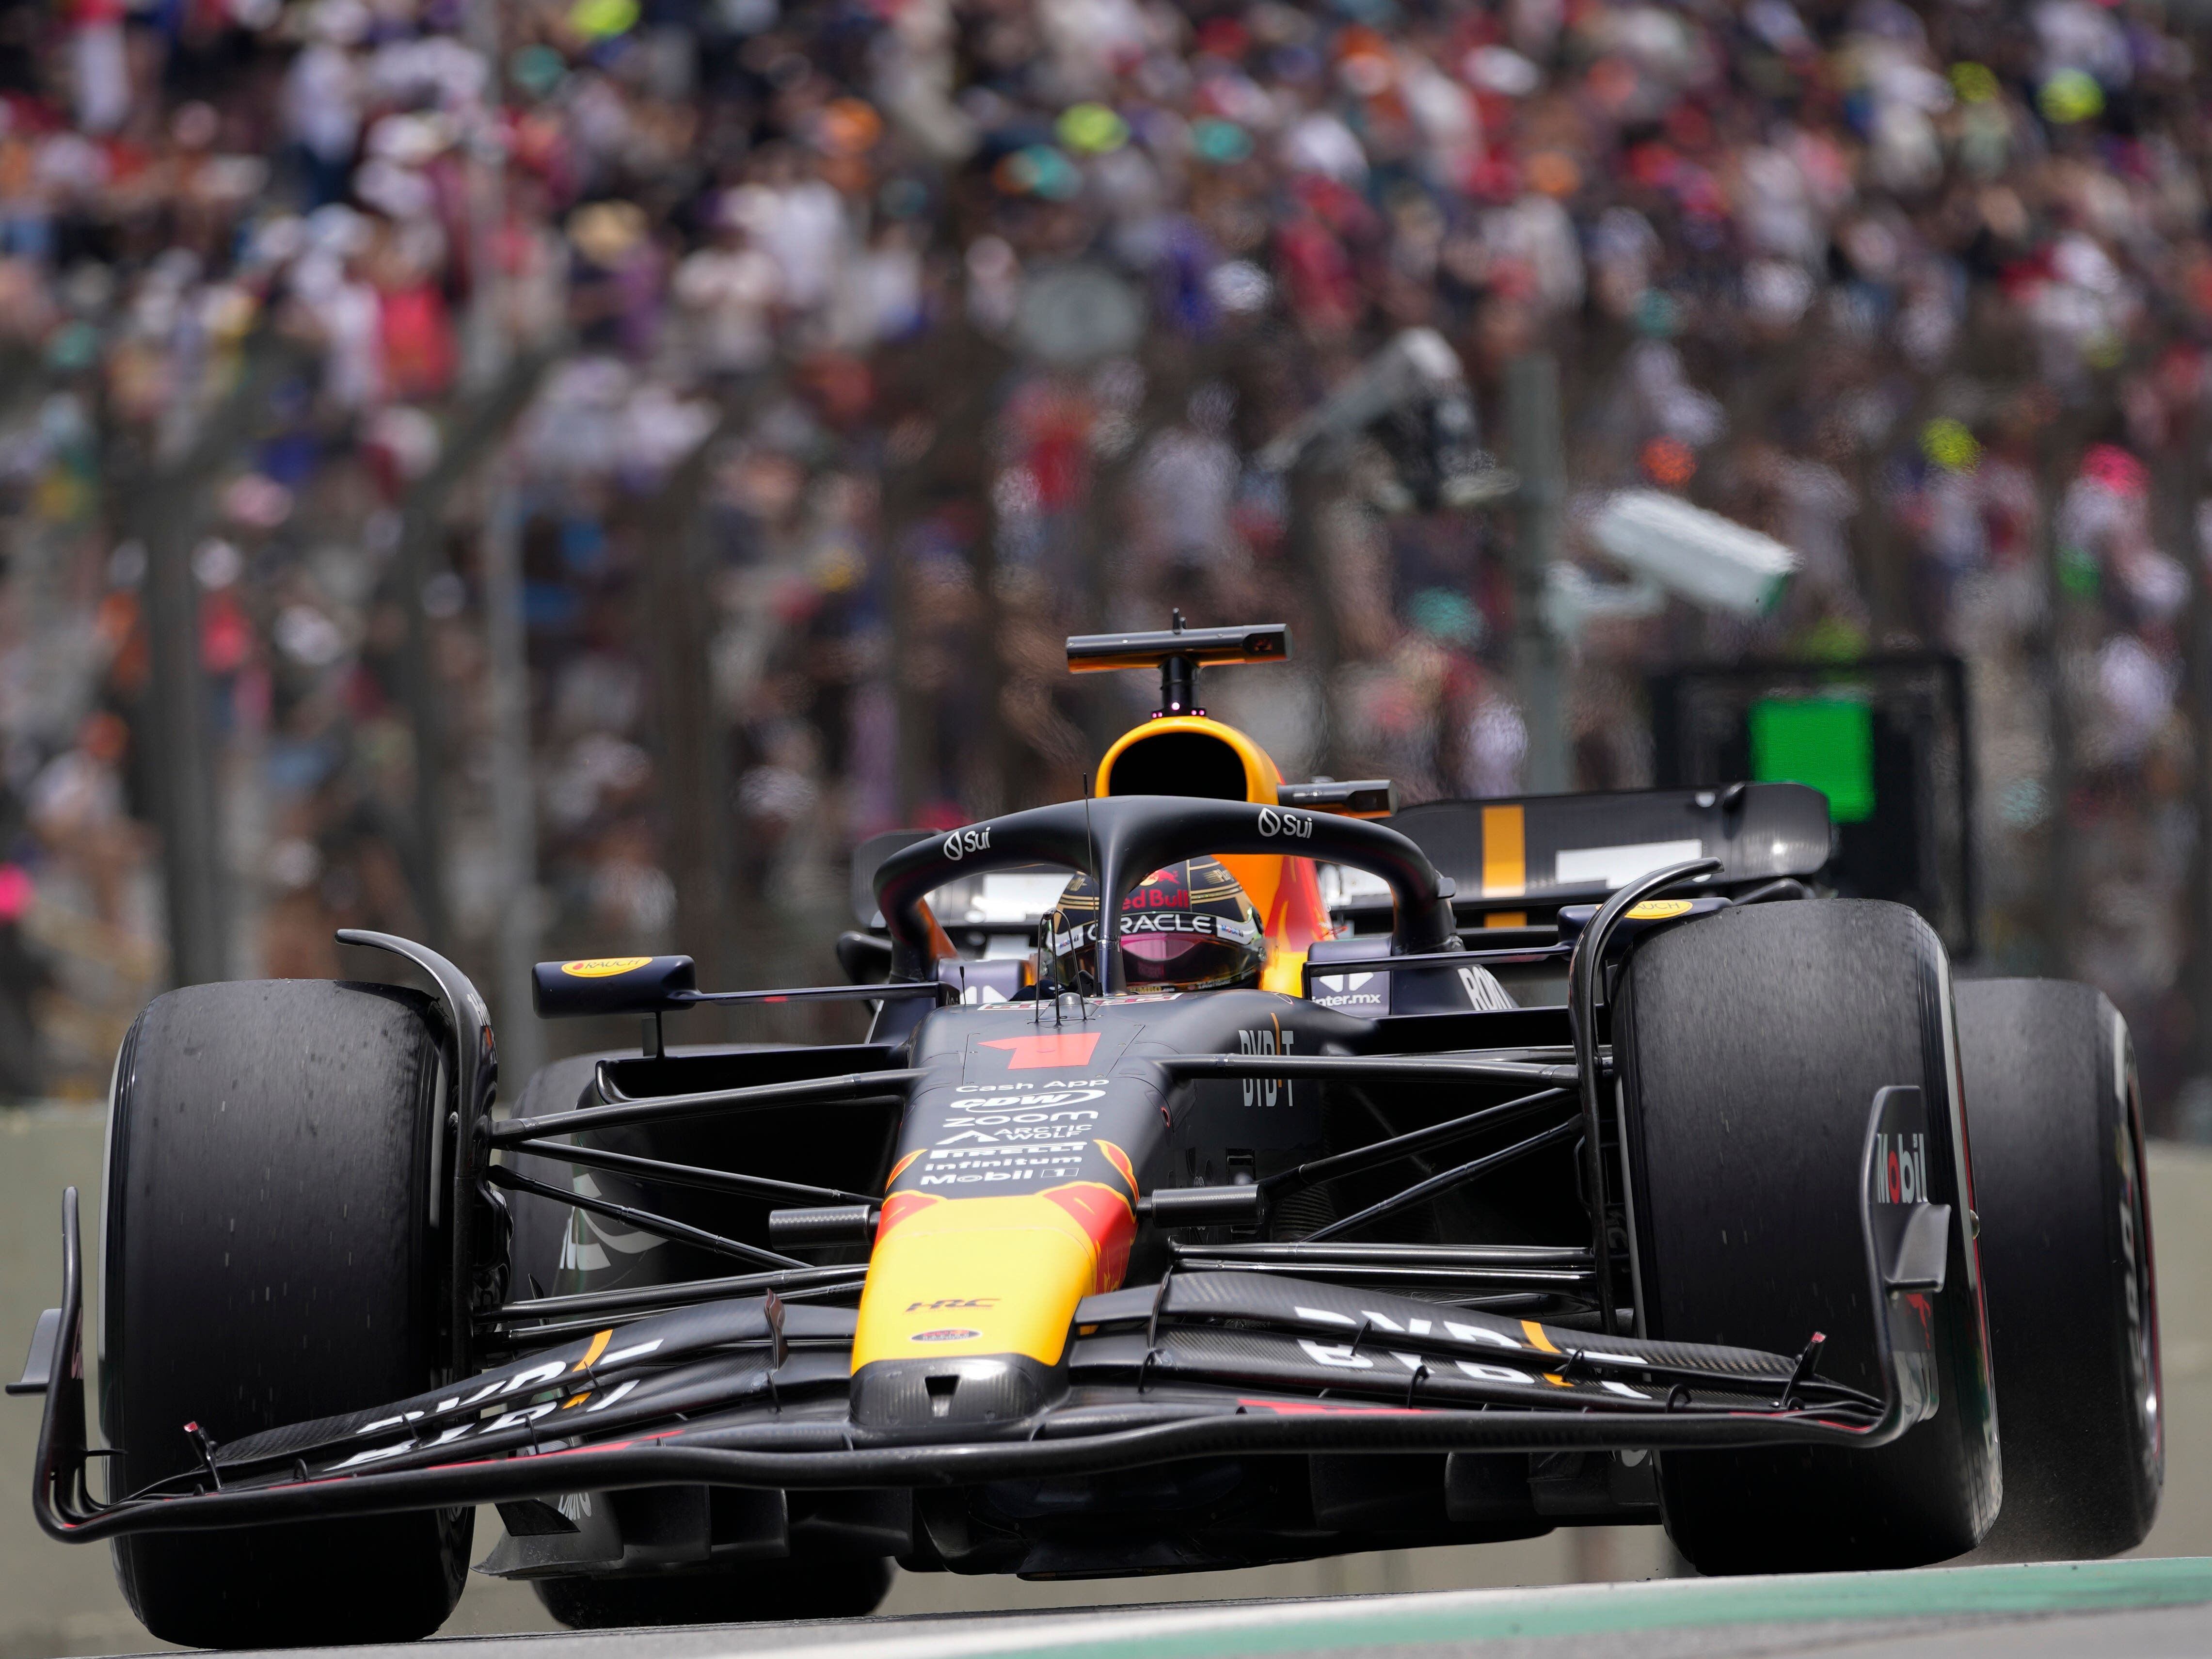 Max Verstappen on pole as storm brings red flags out at Interlagos